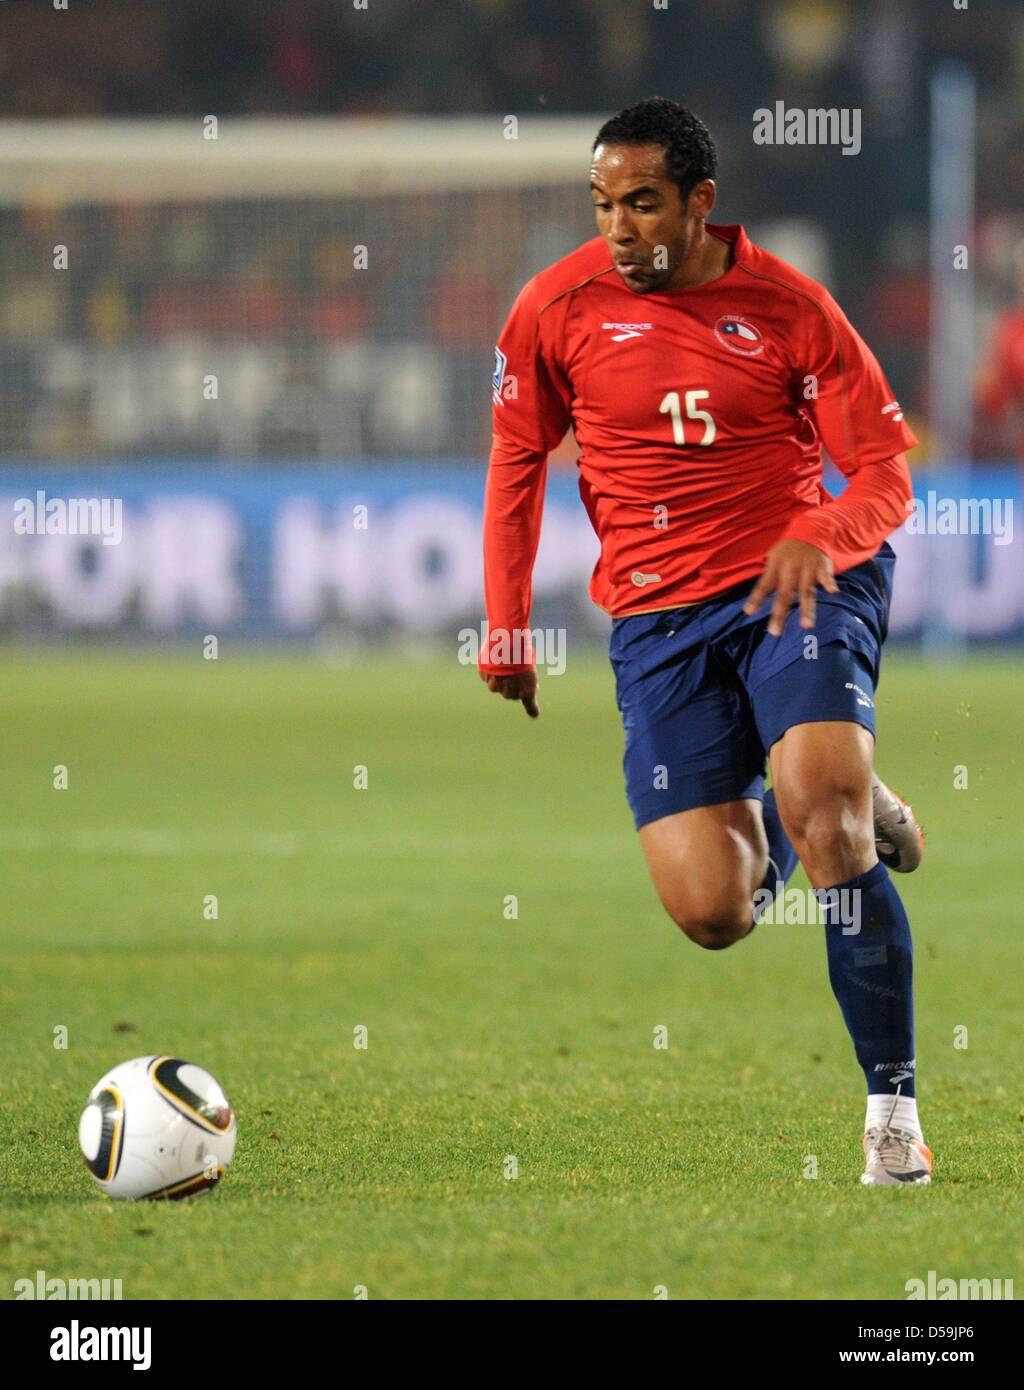 Jean Beausejour of Chile controls the ball during the FIFA World Cup 2010 group H match between Chile and Spain at the Loftus Versfeld Stadium in Pretoria, South Africa 25 June 2010. Photo: Bernd Weissbrod dpa - Please refer to http://dpaq.de/FIFA-WM2010-TC Stock Photo